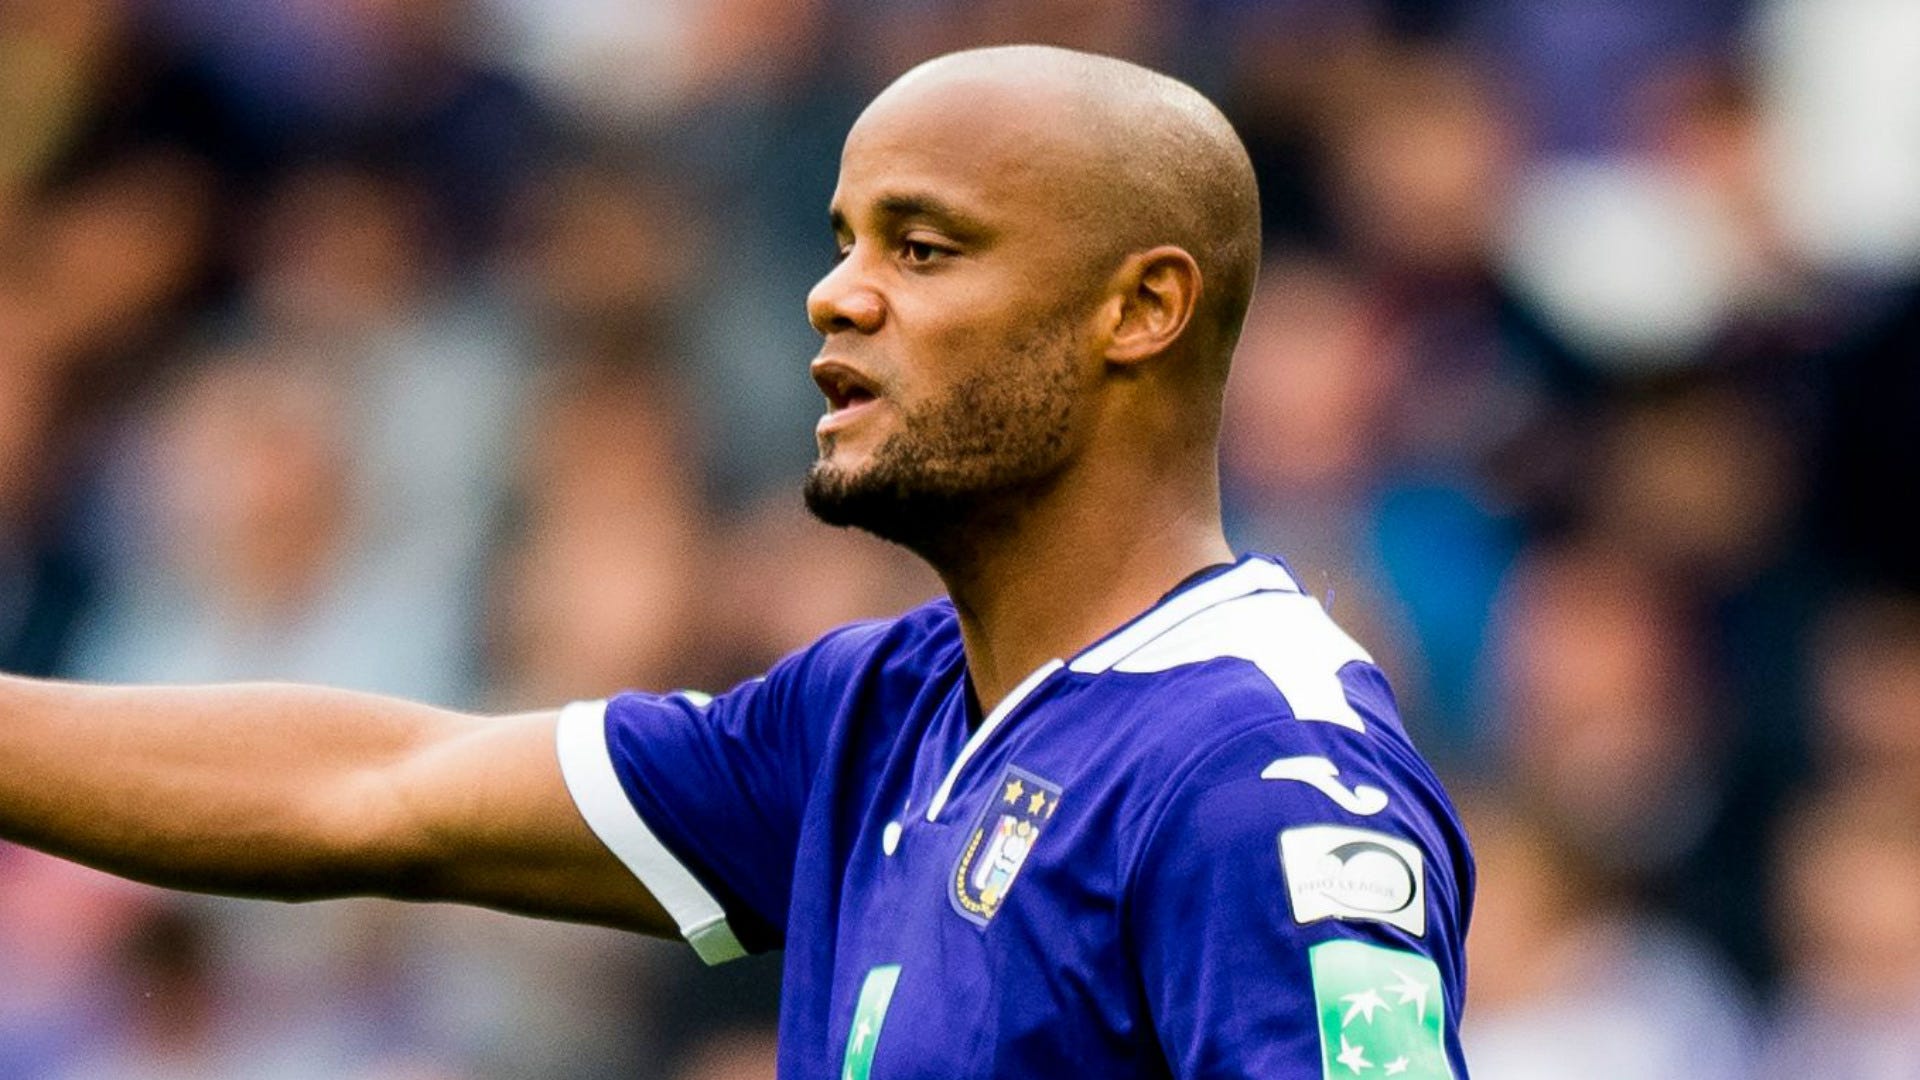 Vincent Kompany Struggles In Player-Coach Role At Belgian Club Anderlecht